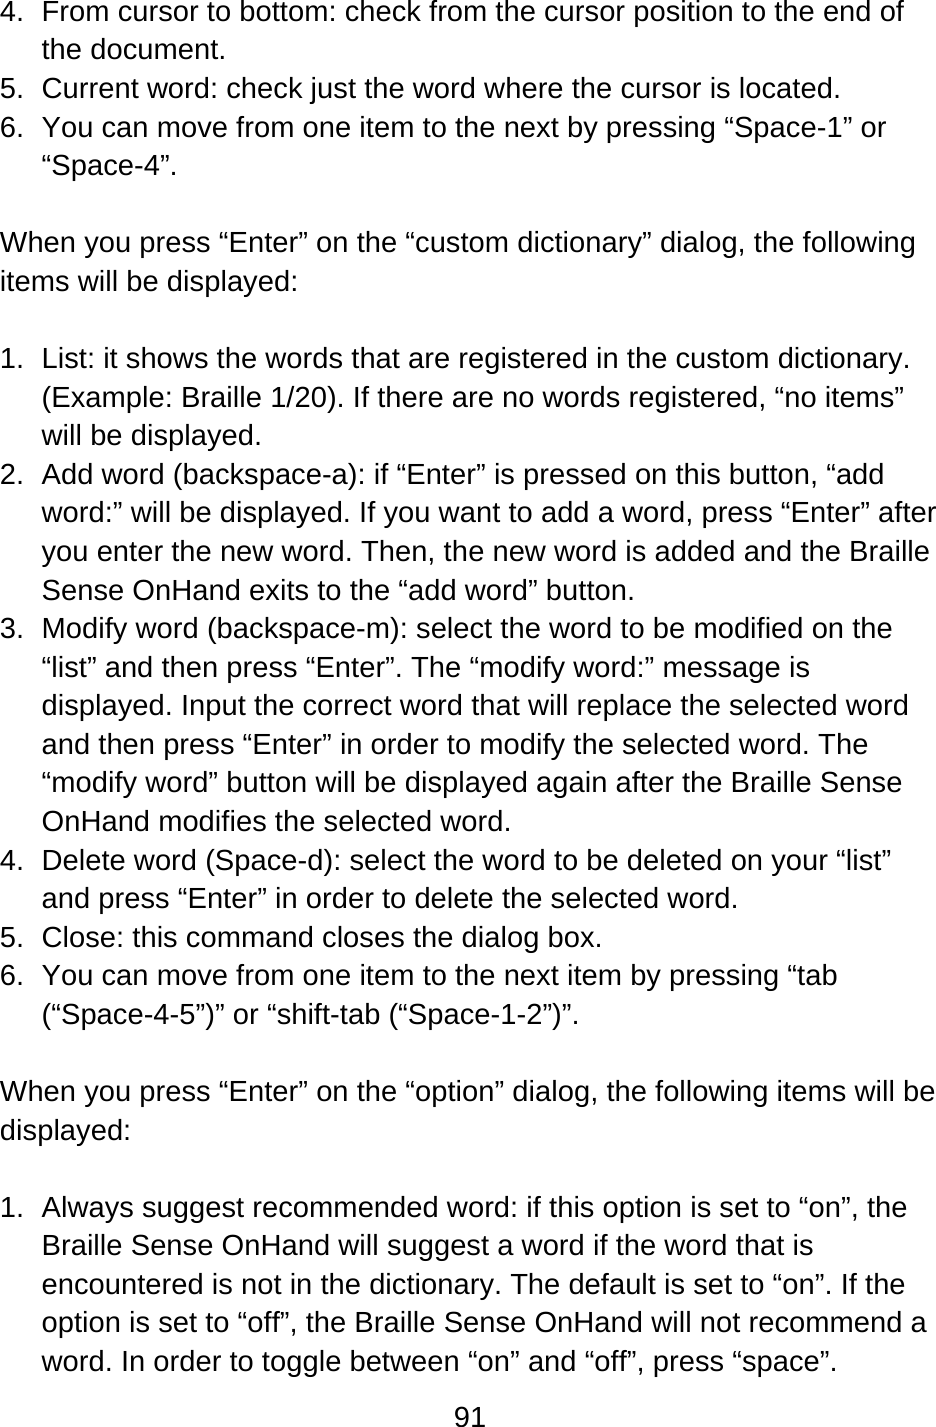 91  4.  From cursor to bottom: check from the cursor position to the end of the document. 5.  Current word: check just the word where the cursor is located. 6.  You can move from one item to the next by pressing “Space-1” or “Space-4”.  When you press “Enter” on the “custom dictionary” dialog, the following items will be displayed:  1.  List: it shows the words that are registered in the custom dictionary. (Example: Braille 1/20). If there are no words registered, “no items” will be displayed. 2.  Add word (backspace-a): if “Enter” is pressed on this button, “add word:” will be displayed. If you want to add a word, press “Enter” after you enter the new word. Then, the new word is added and the Braille Sense OnHand exits to the “add word” button. 3.  Modify word (backspace-m): select the word to be modified on the “list” and then press “Enter”. The “modify word:” message is displayed. Input the correct word that will replace the selected word and then press “Enter” in order to modify the selected word. The “modify word” button will be displayed again after the Braille Sense OnHand modifies the selected word. 4.  Delete word (Space-d): select the word to be deleted on your “list” and press “Enter” in order to delete the selected word.   5.  Close: this command closes the dialog box. 6.  You can move from one item to the next item by pressing “tab (“Space-4-5”)” or “shift-tab (“Space-1-2”)”.  When you press “Enter” on the “option” dialog, the following items will be displayed:  1.  Always suggest recommended word: if this option is set to “on”, the Braille Sense OnHand will suggest a word if the word that is encountered is not in the dictionary. The default is set to “on”. If the option is set to “off”, the Braille Sense OnHand will not recommend a word. In order to toggle between “on” and “off”, press “space”. 